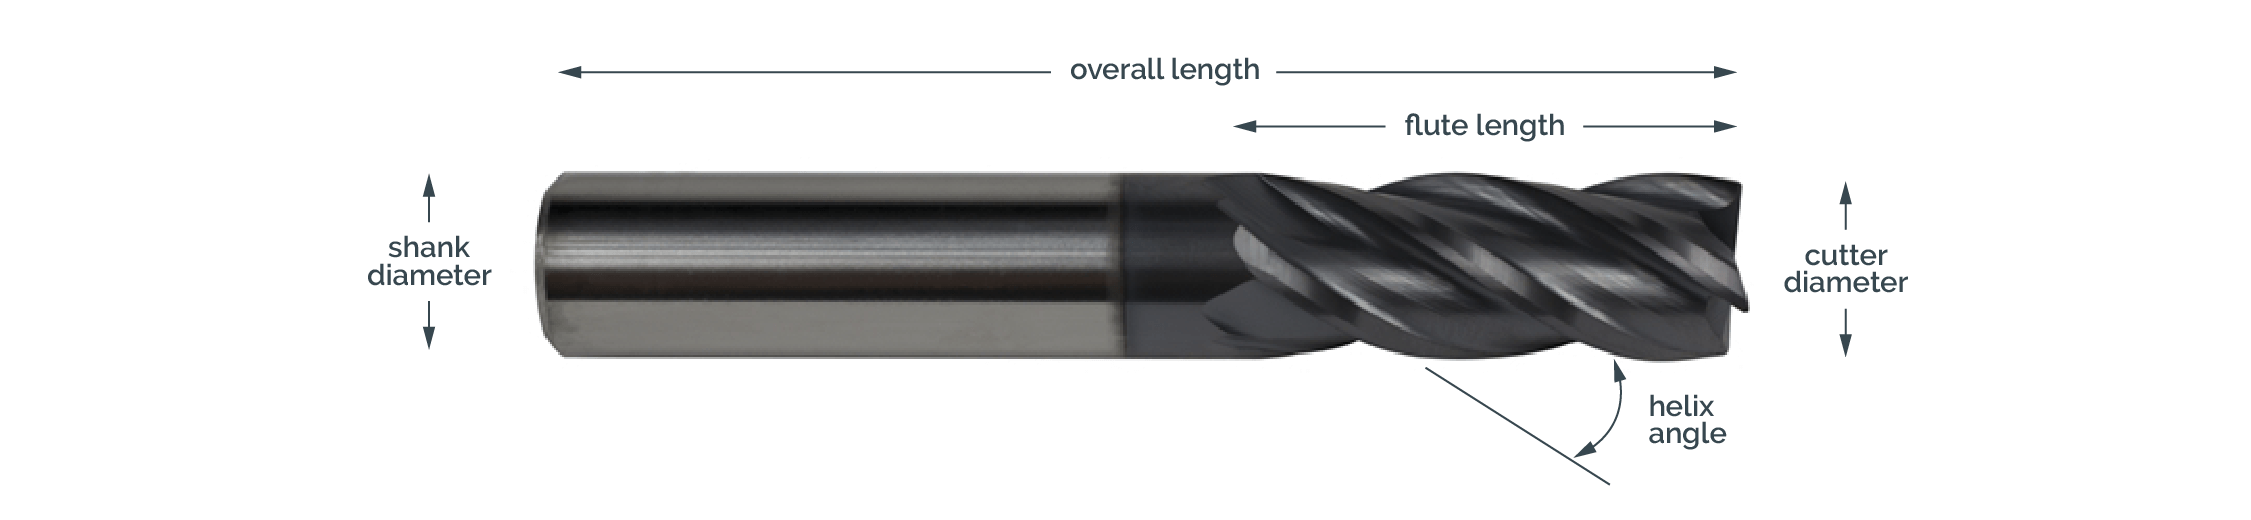 Carbide Corner Radius End Mill 30° Helix 3/8 in Dia 3/8 in Shank 2 Flute Morse Cutting Tools 59104 1 in Length of Cut 